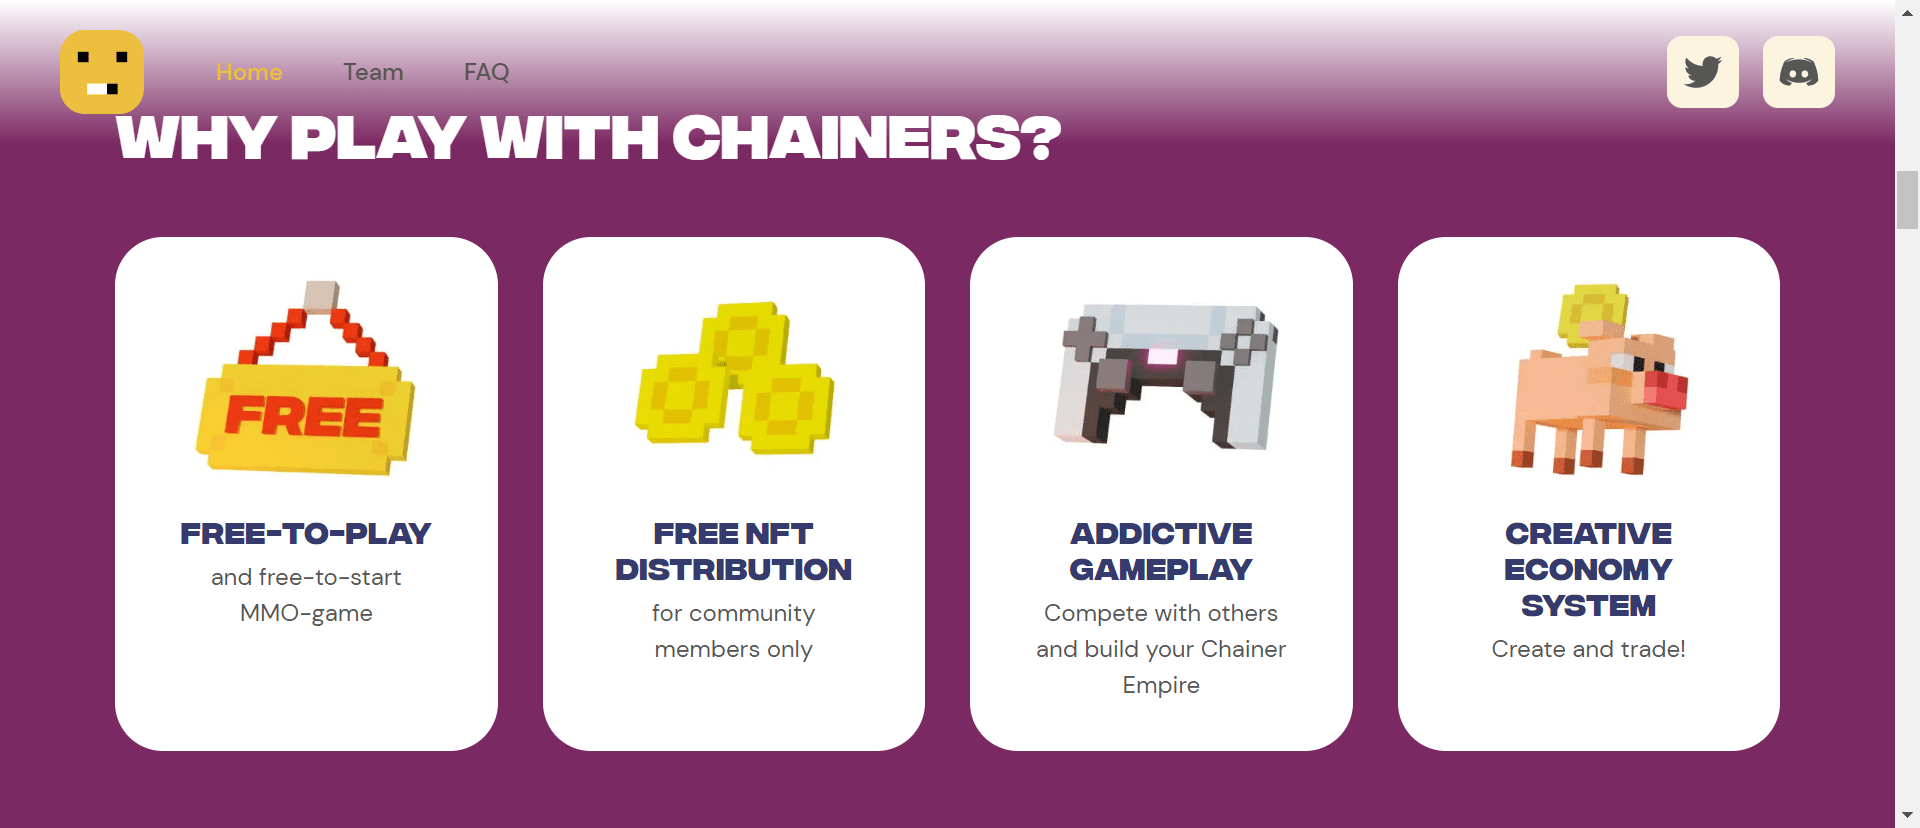 Chainers: Best Features & Benefits